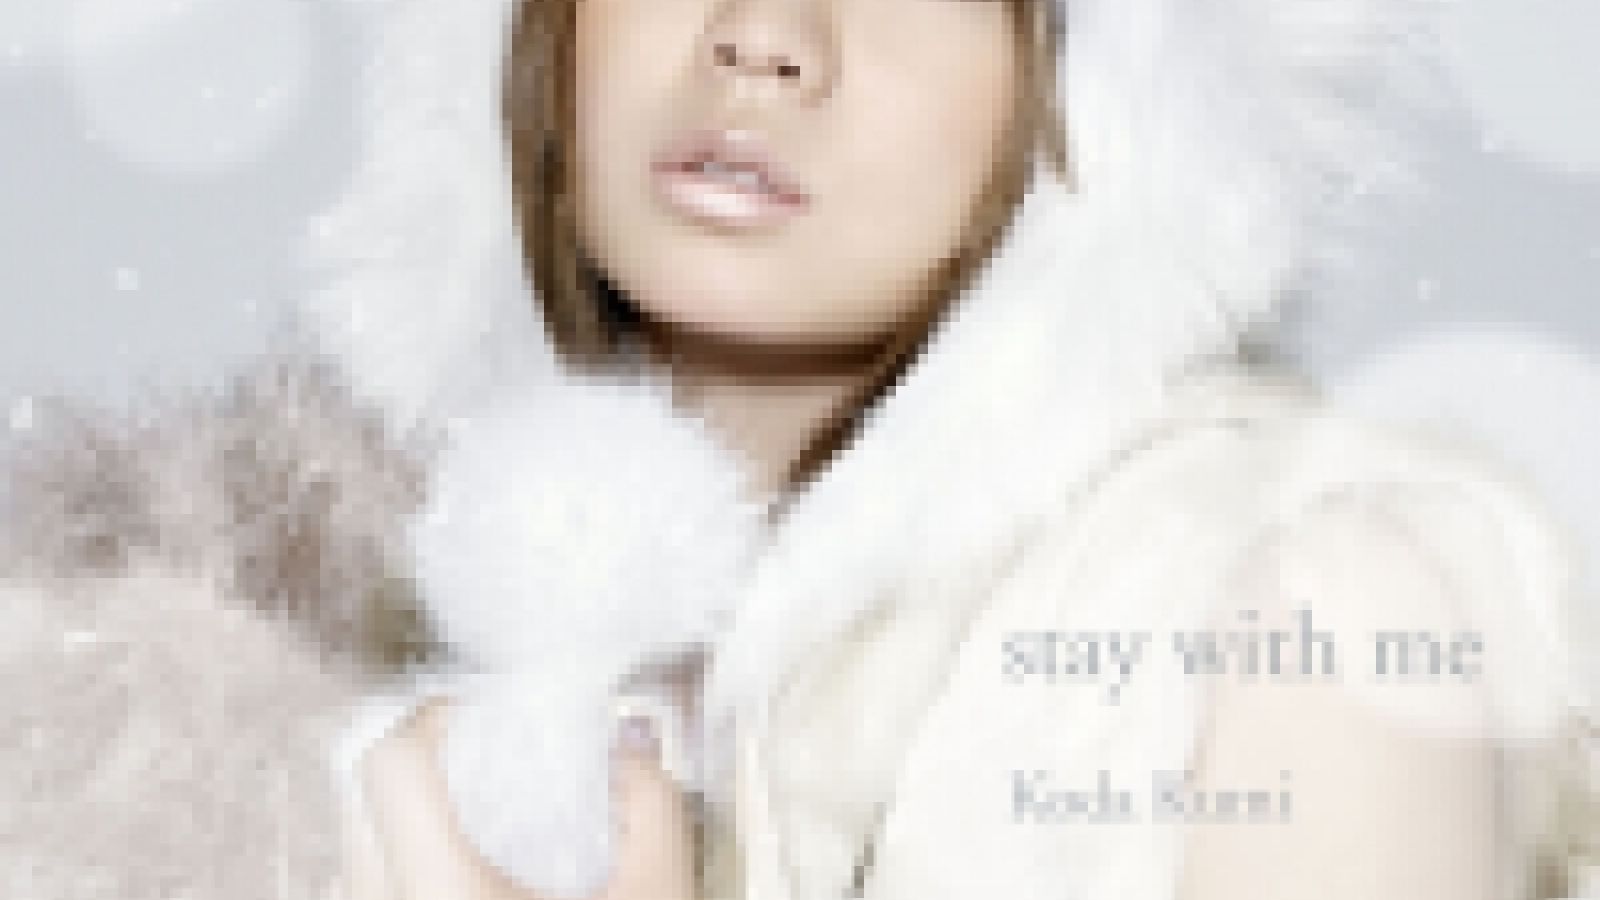 Koda Kumi - stay with me © GORDIE ENTERTAINMENT Co.,ltd All Rights Reserved.